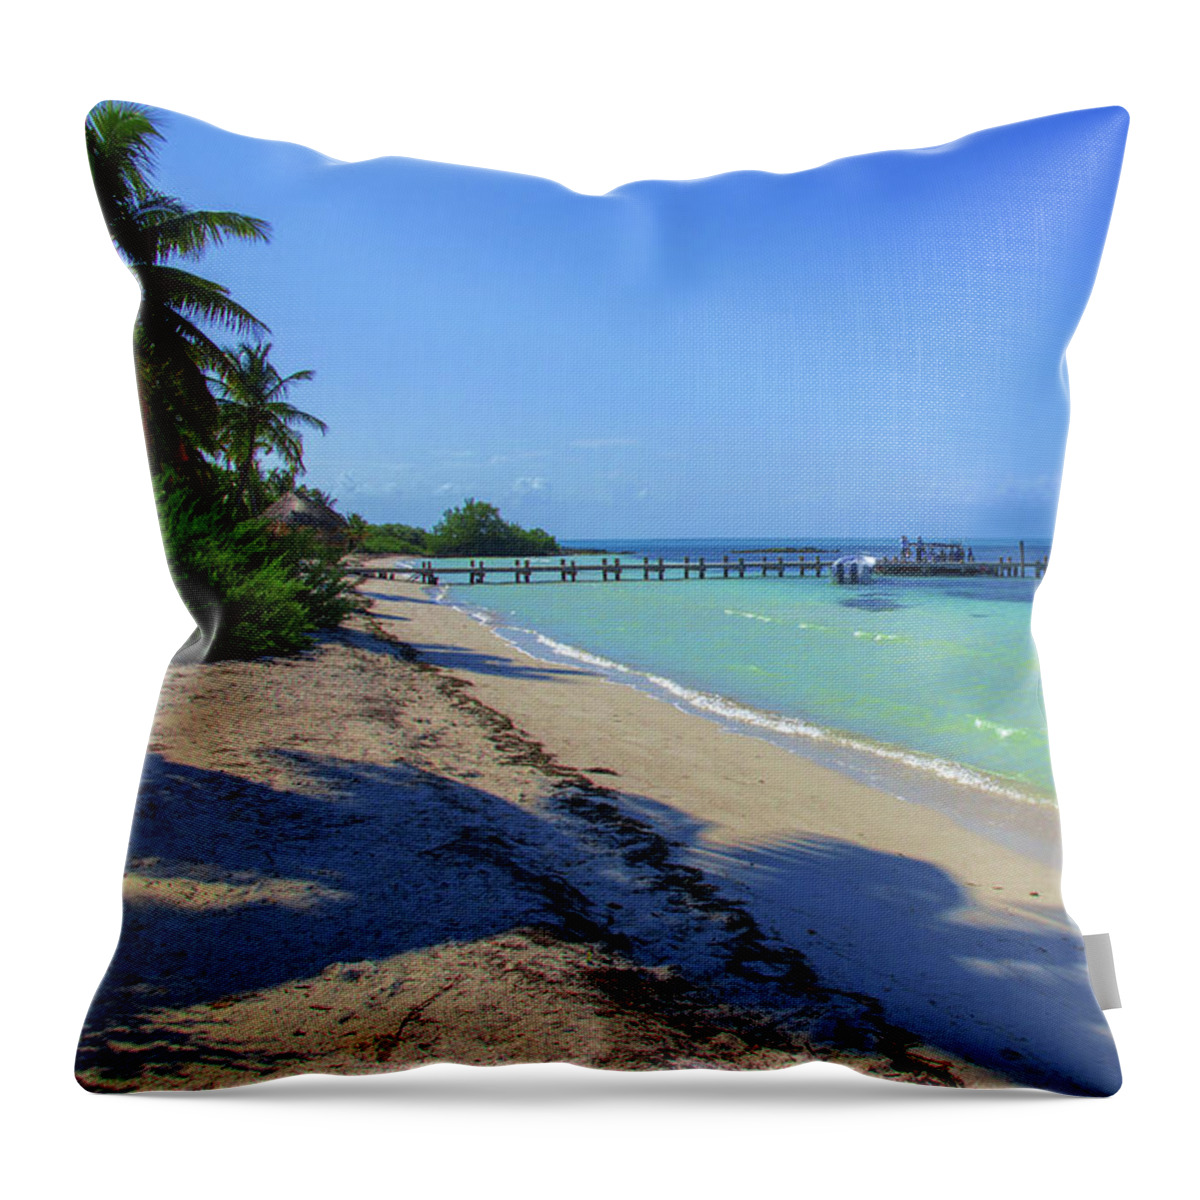 Jetty Throw Pillow featuring the photograph Jetty on Isla Contoy by Sun Travels